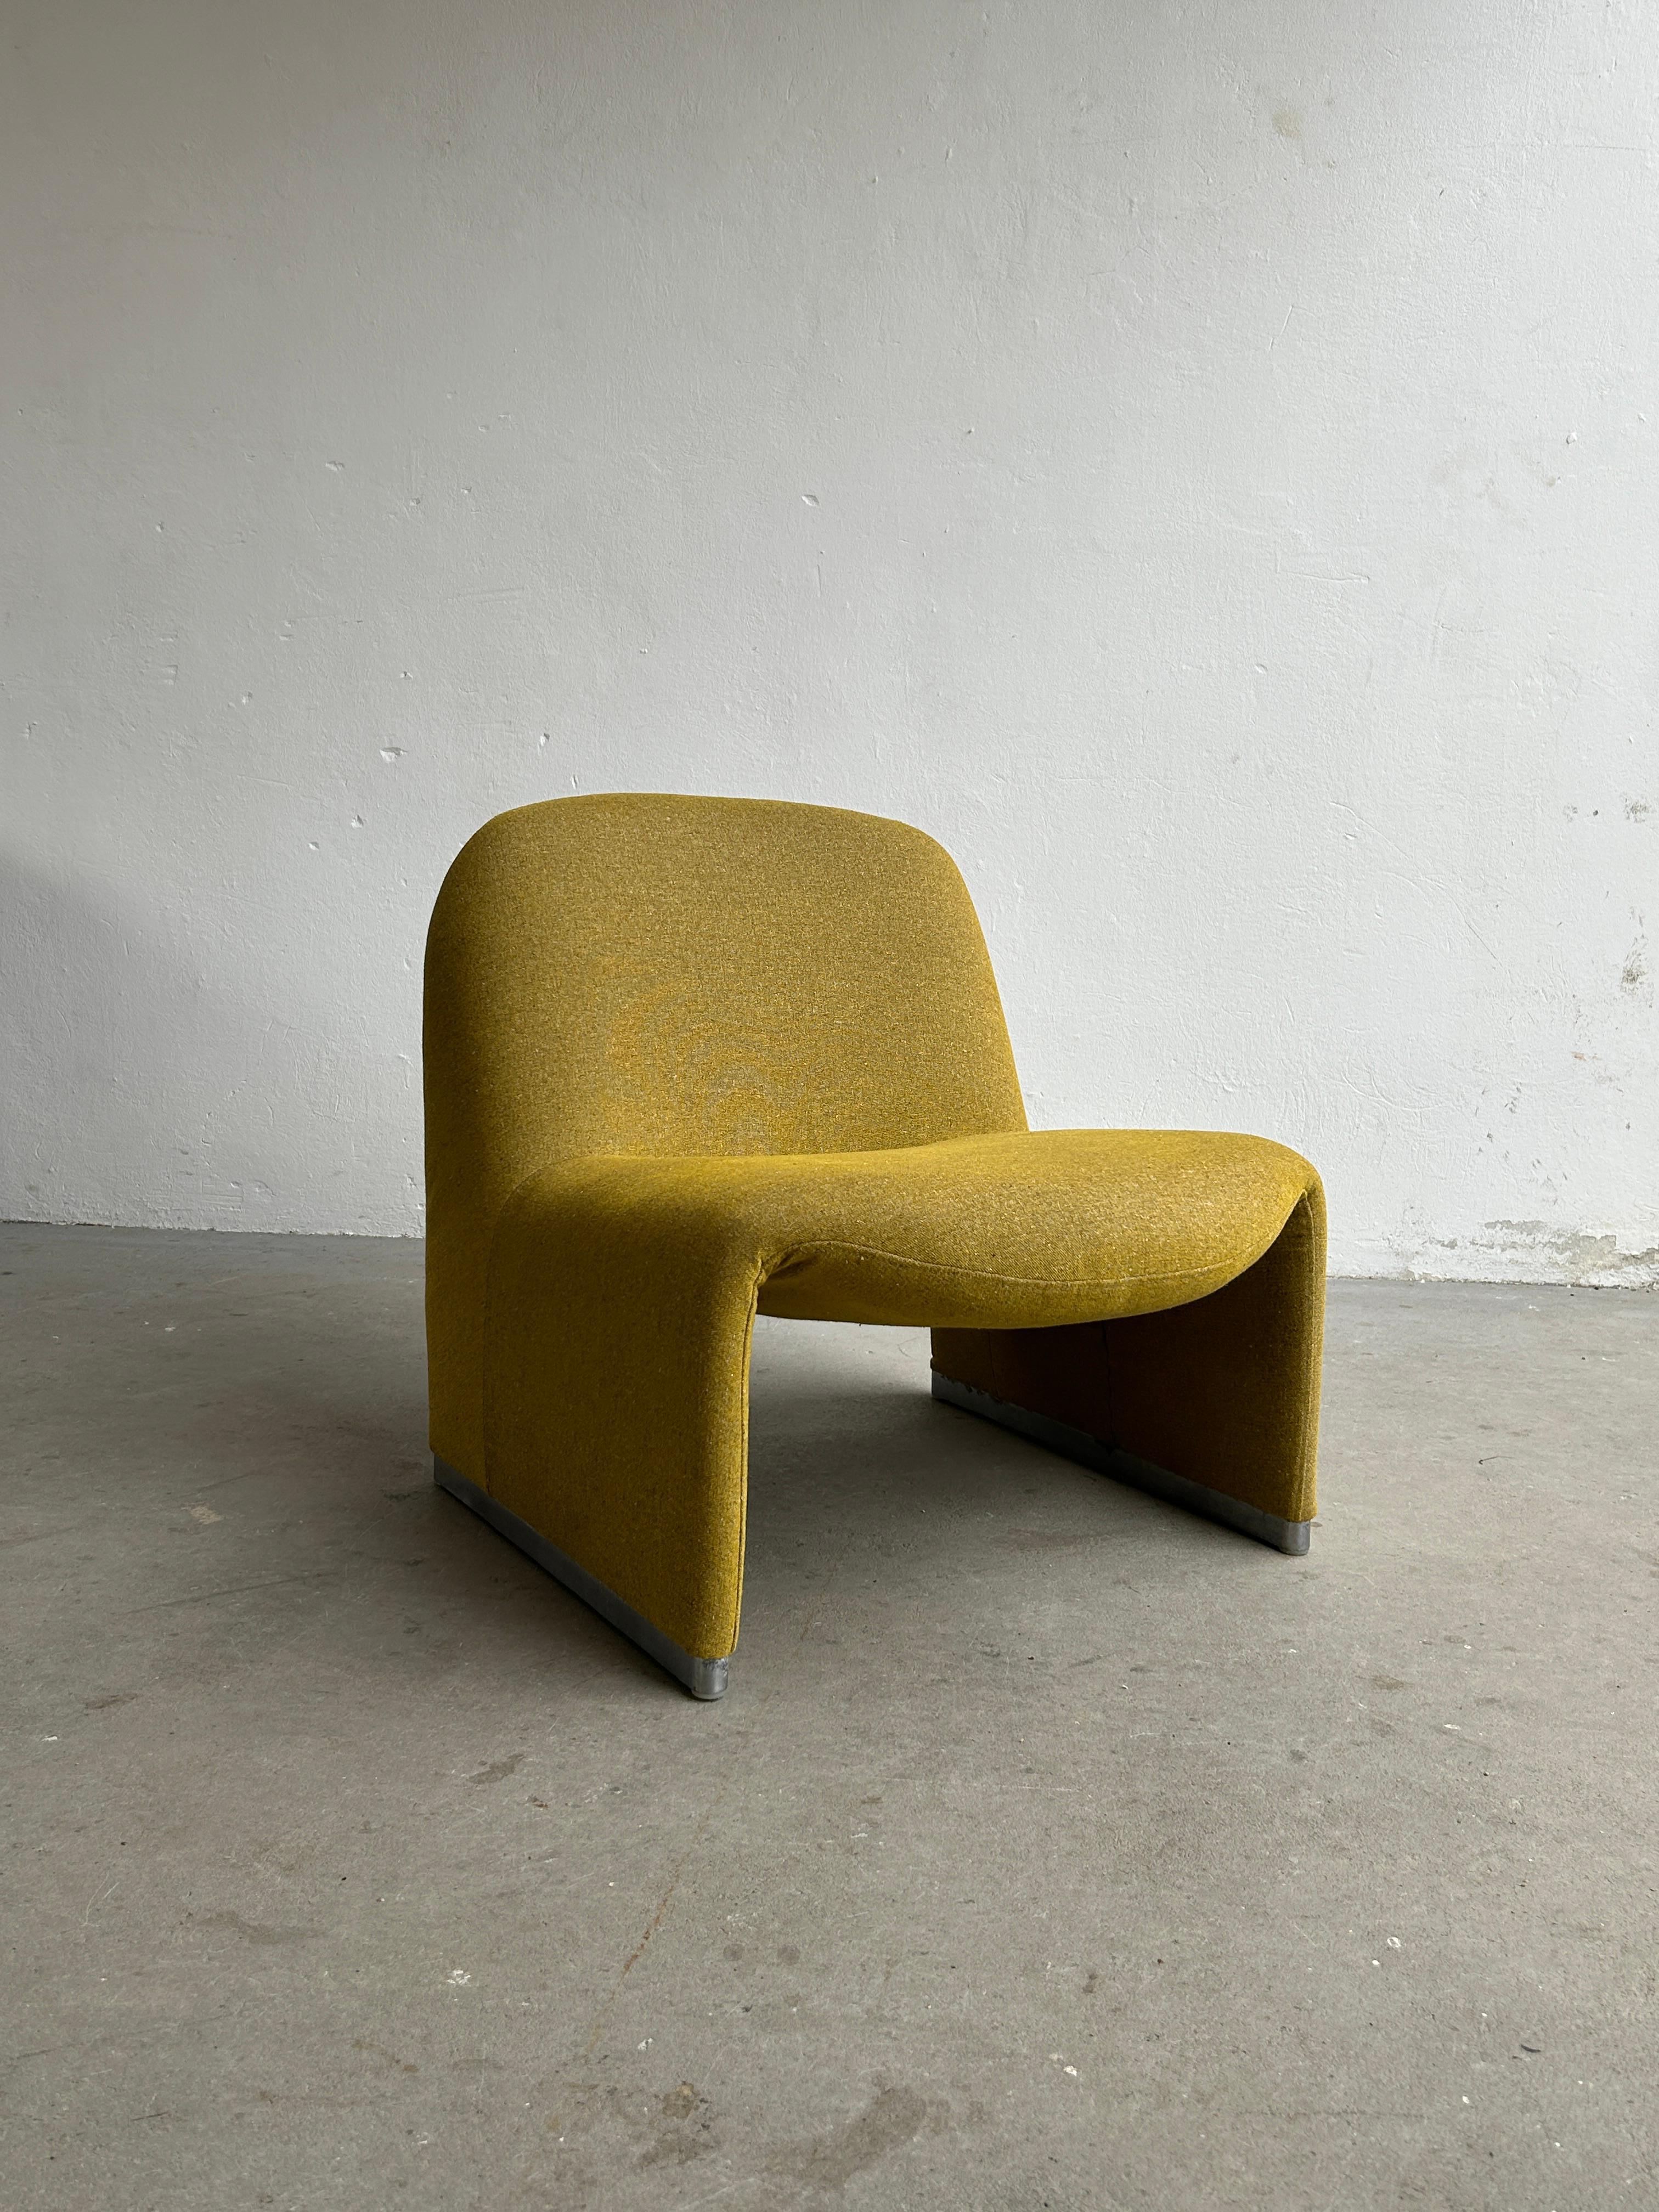 An original vintage iconic 'Alky' chair, designed by Giancarlo Piretti for Anonima Castelli. Produced in the late 1970s in Italy.
Iconic Italian design.

Re-upholstered in a quality Mid-Century Modern coloured yellow mustard fabric, produced by